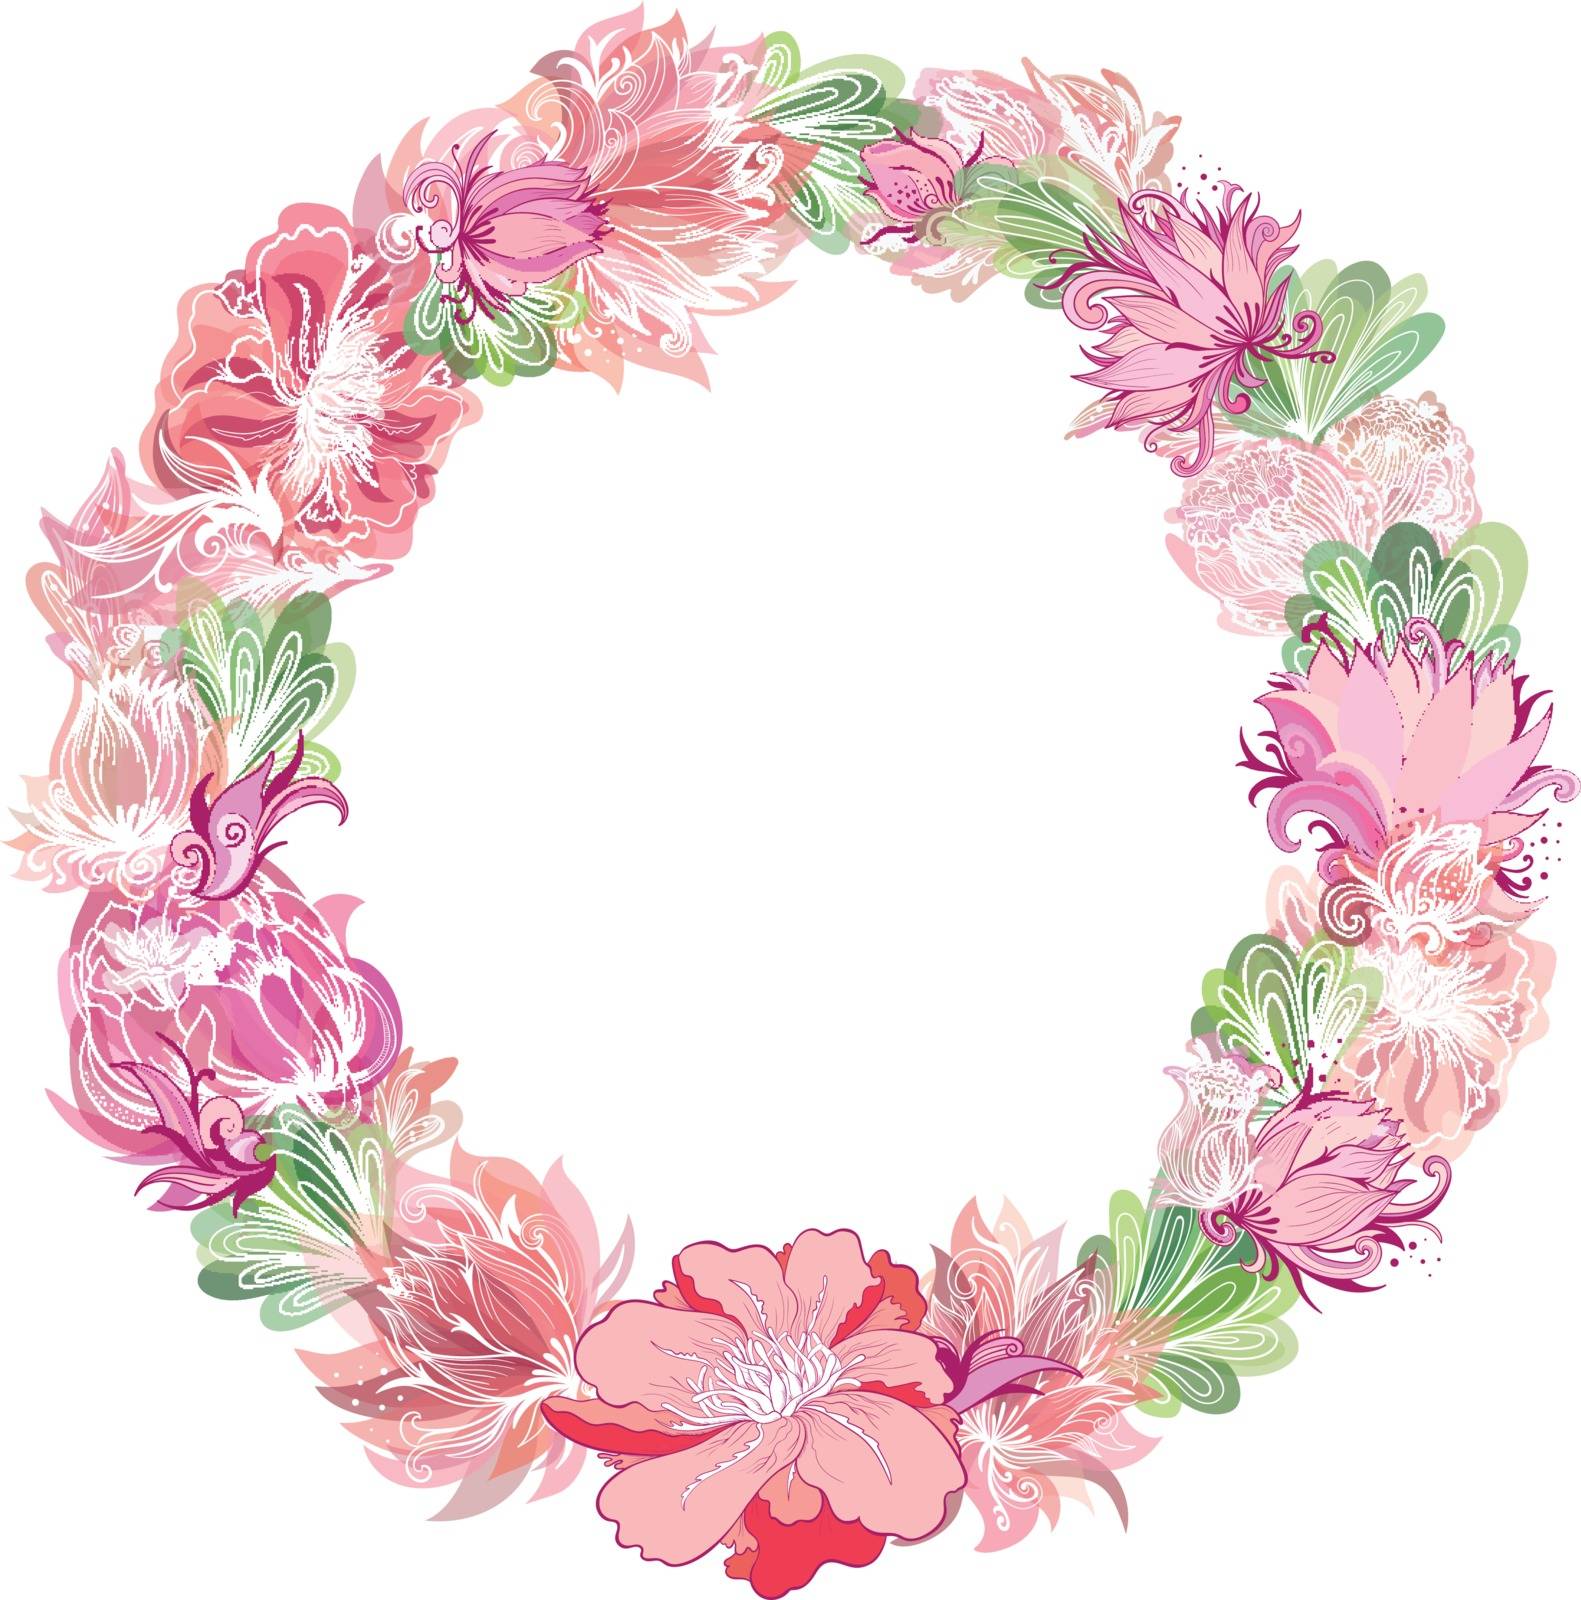 Gentle Vector Floral Wreath by kisika